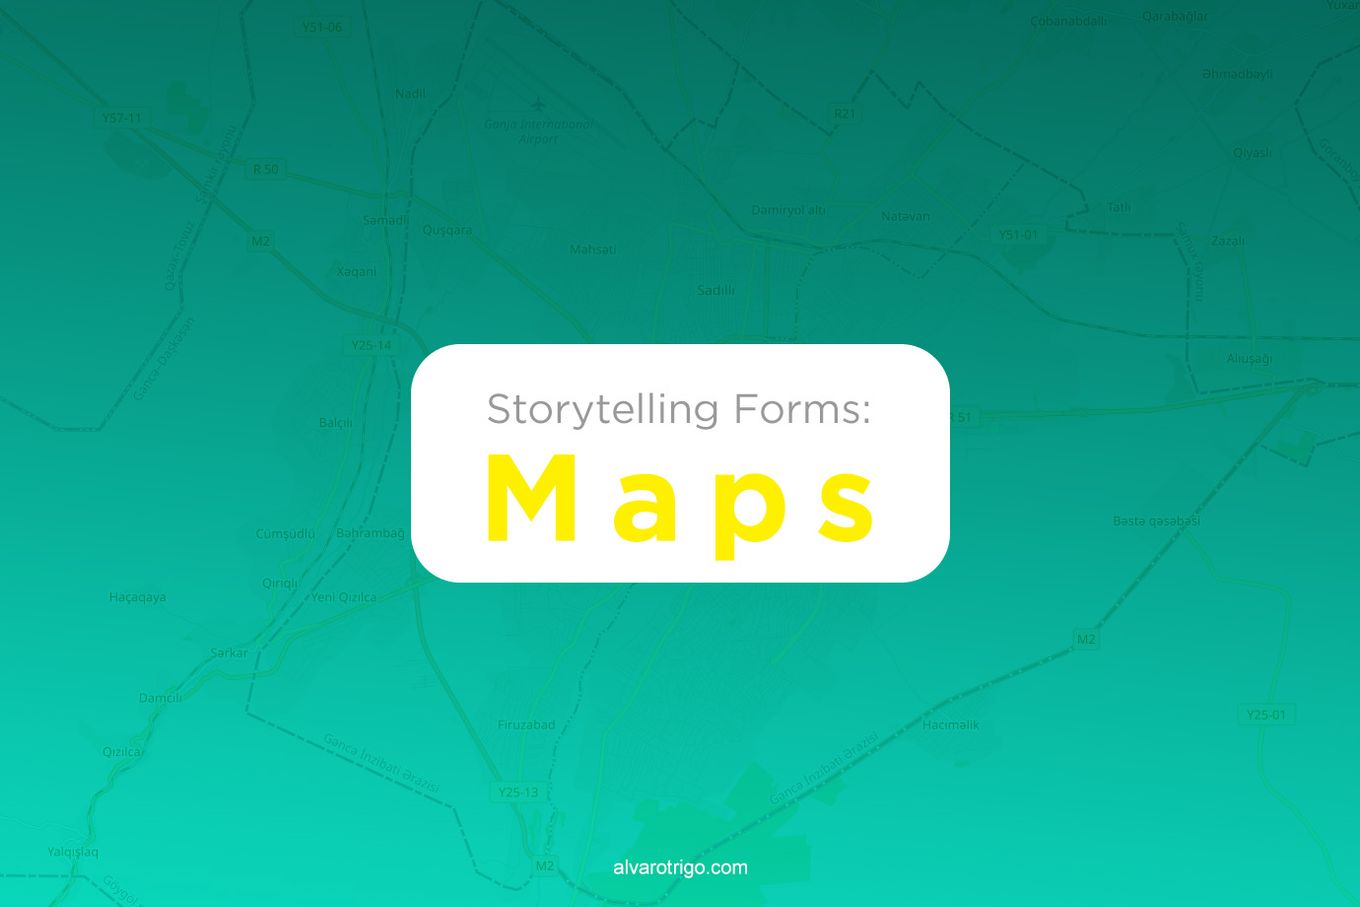 Storytelling Forms - Maps